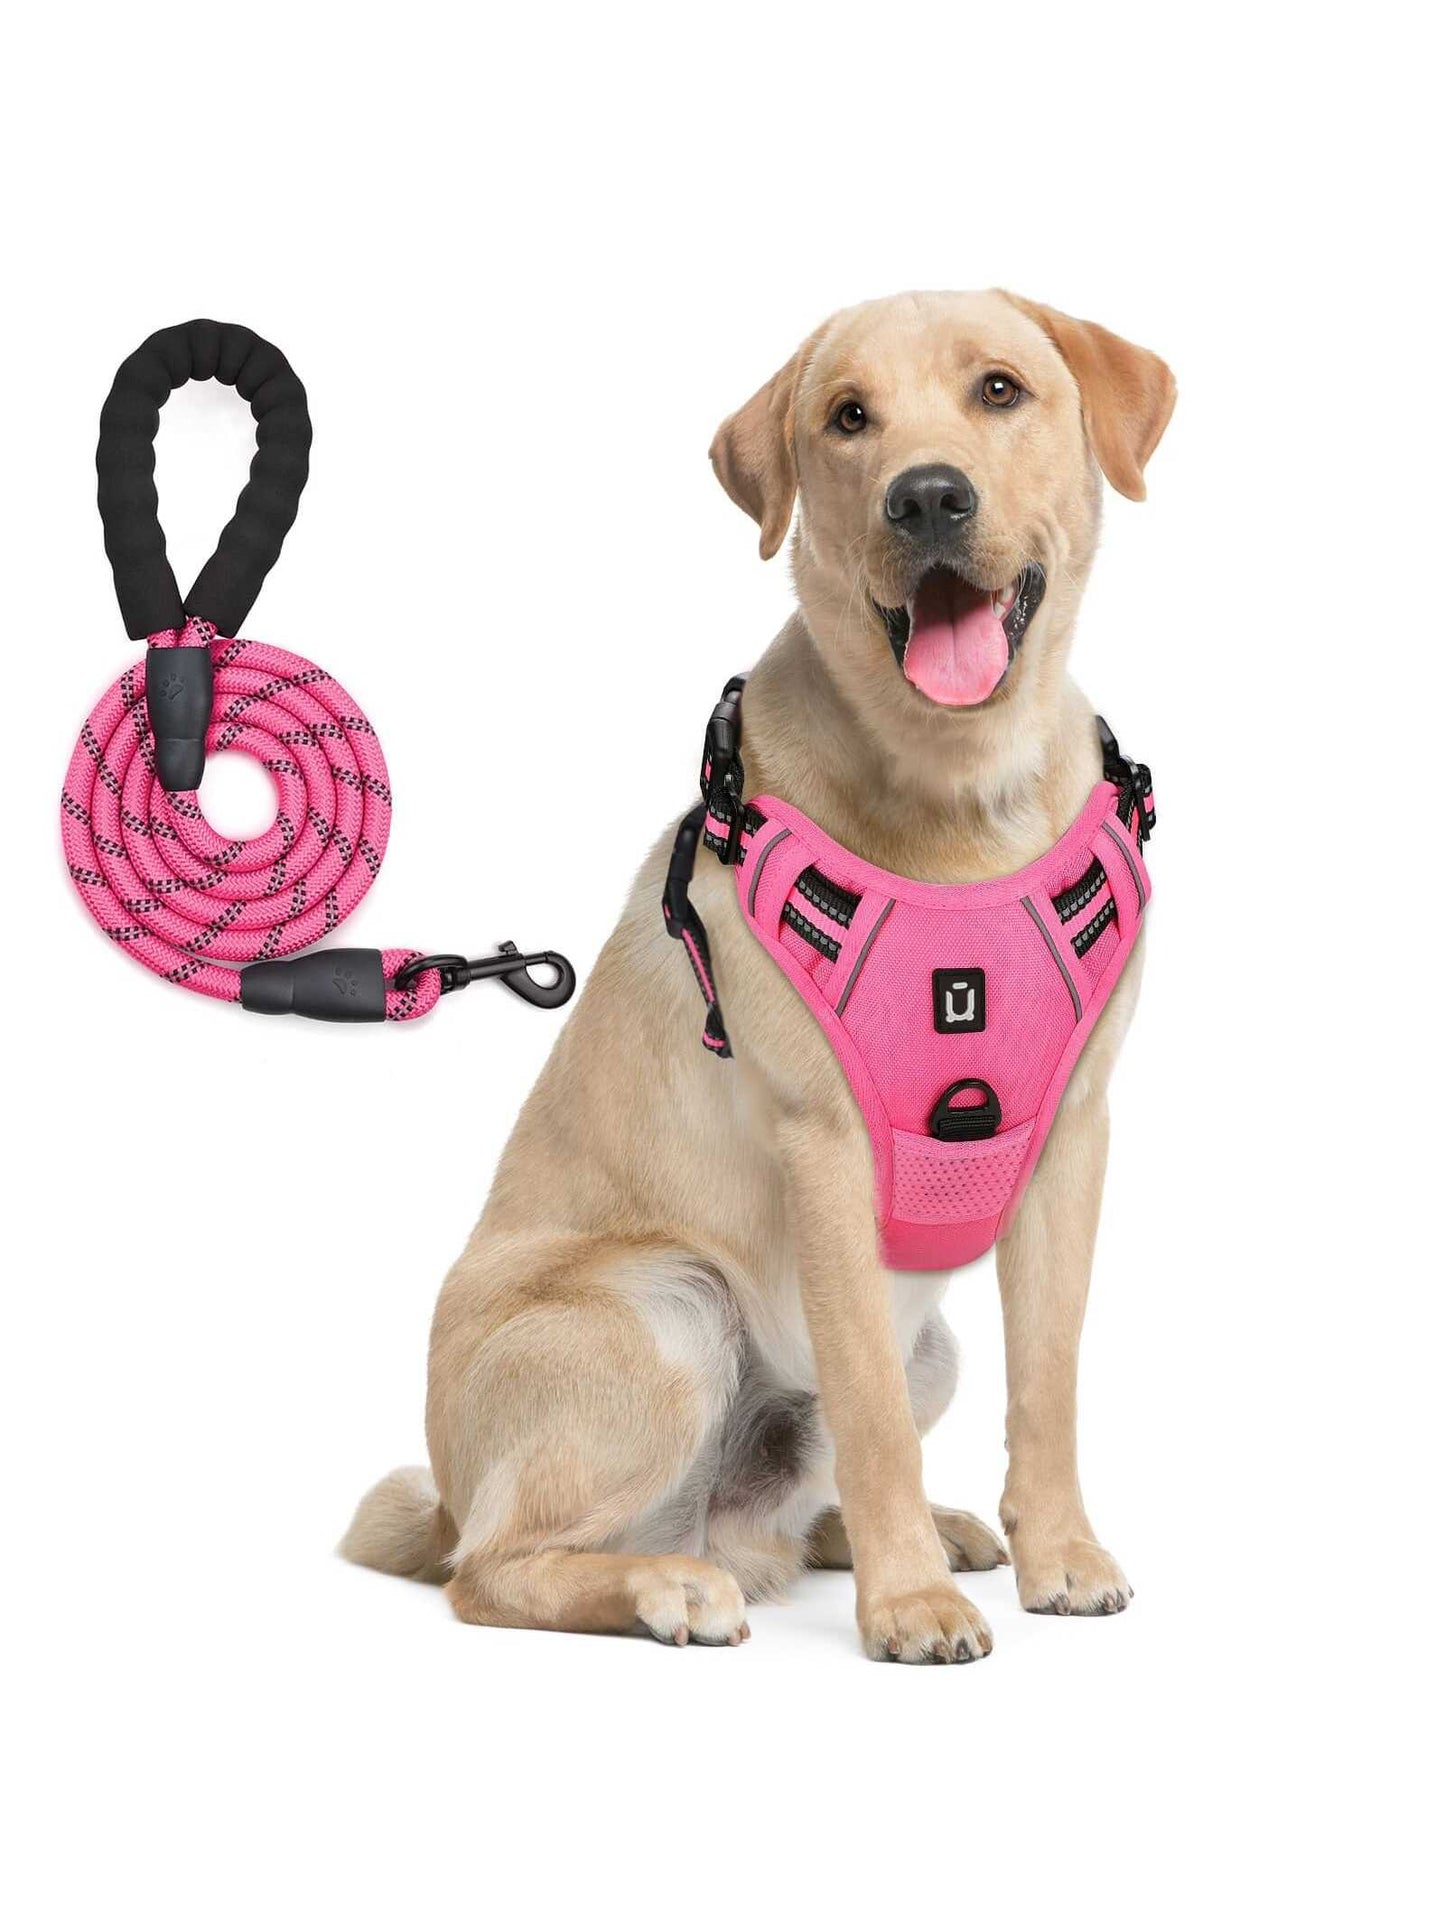 Dog Harness and Leash Combo, Escape Proof No Pull Vest Harness, with 5 Feet Leash, Reflective Adjustable Soft Padded Pet Harness with Handle for Small to Large Dogs